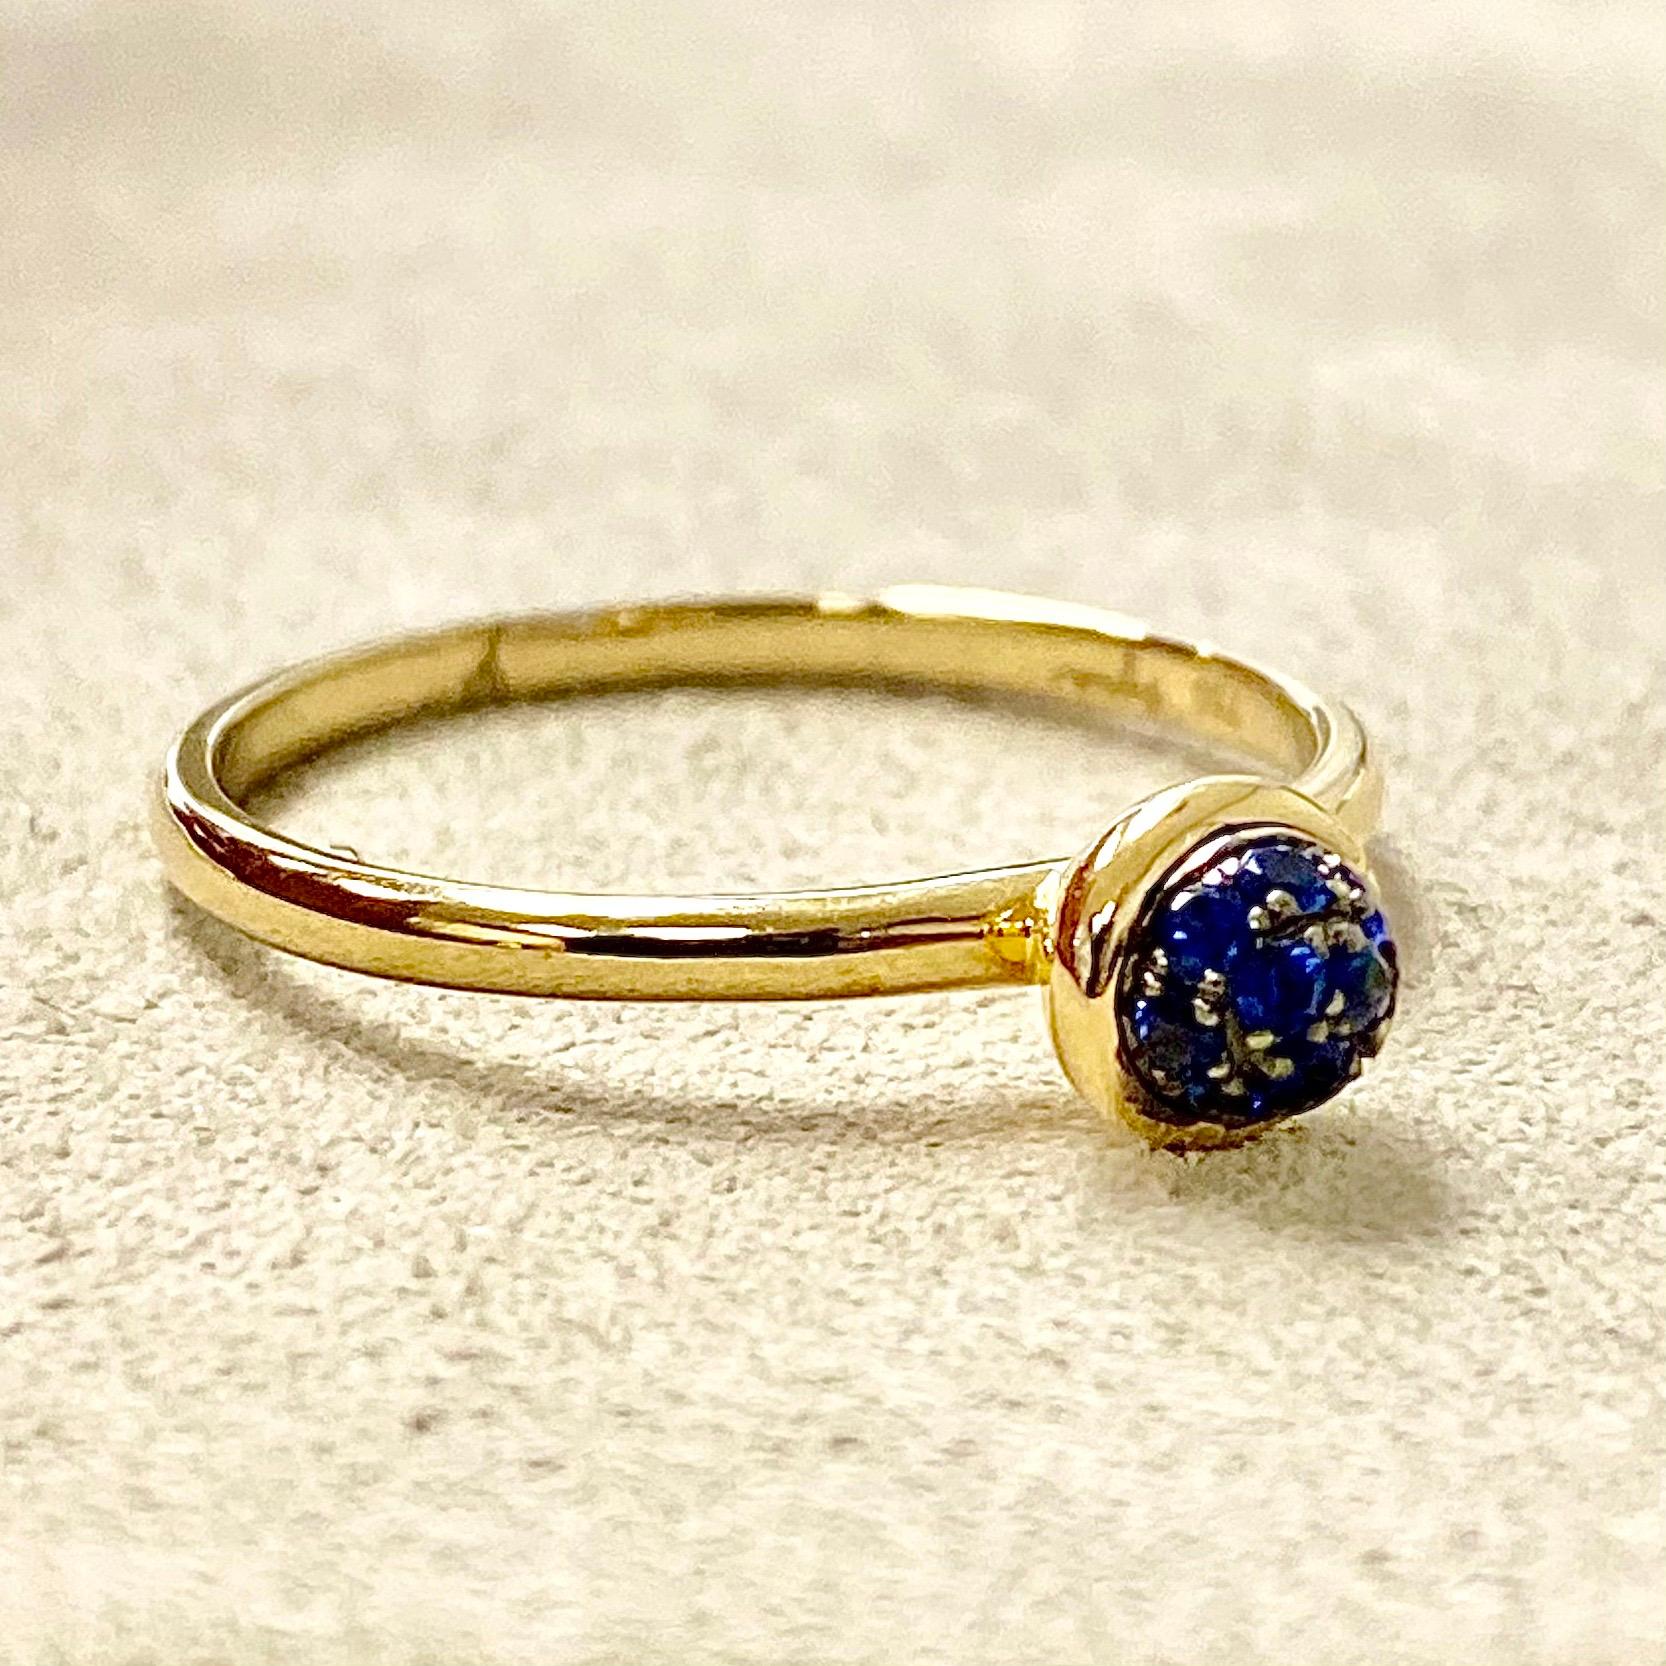 Created in 18 karat yellow gold
Blue sapphires 0.10 carat approx.
Blue sapphire pave ring 5 mm diameter approx.
Ring size US 6.5, can be sized upon request.

Crafted in luminous 18K yellow gold, this ring is distinguished by its sprinkling of 0.10